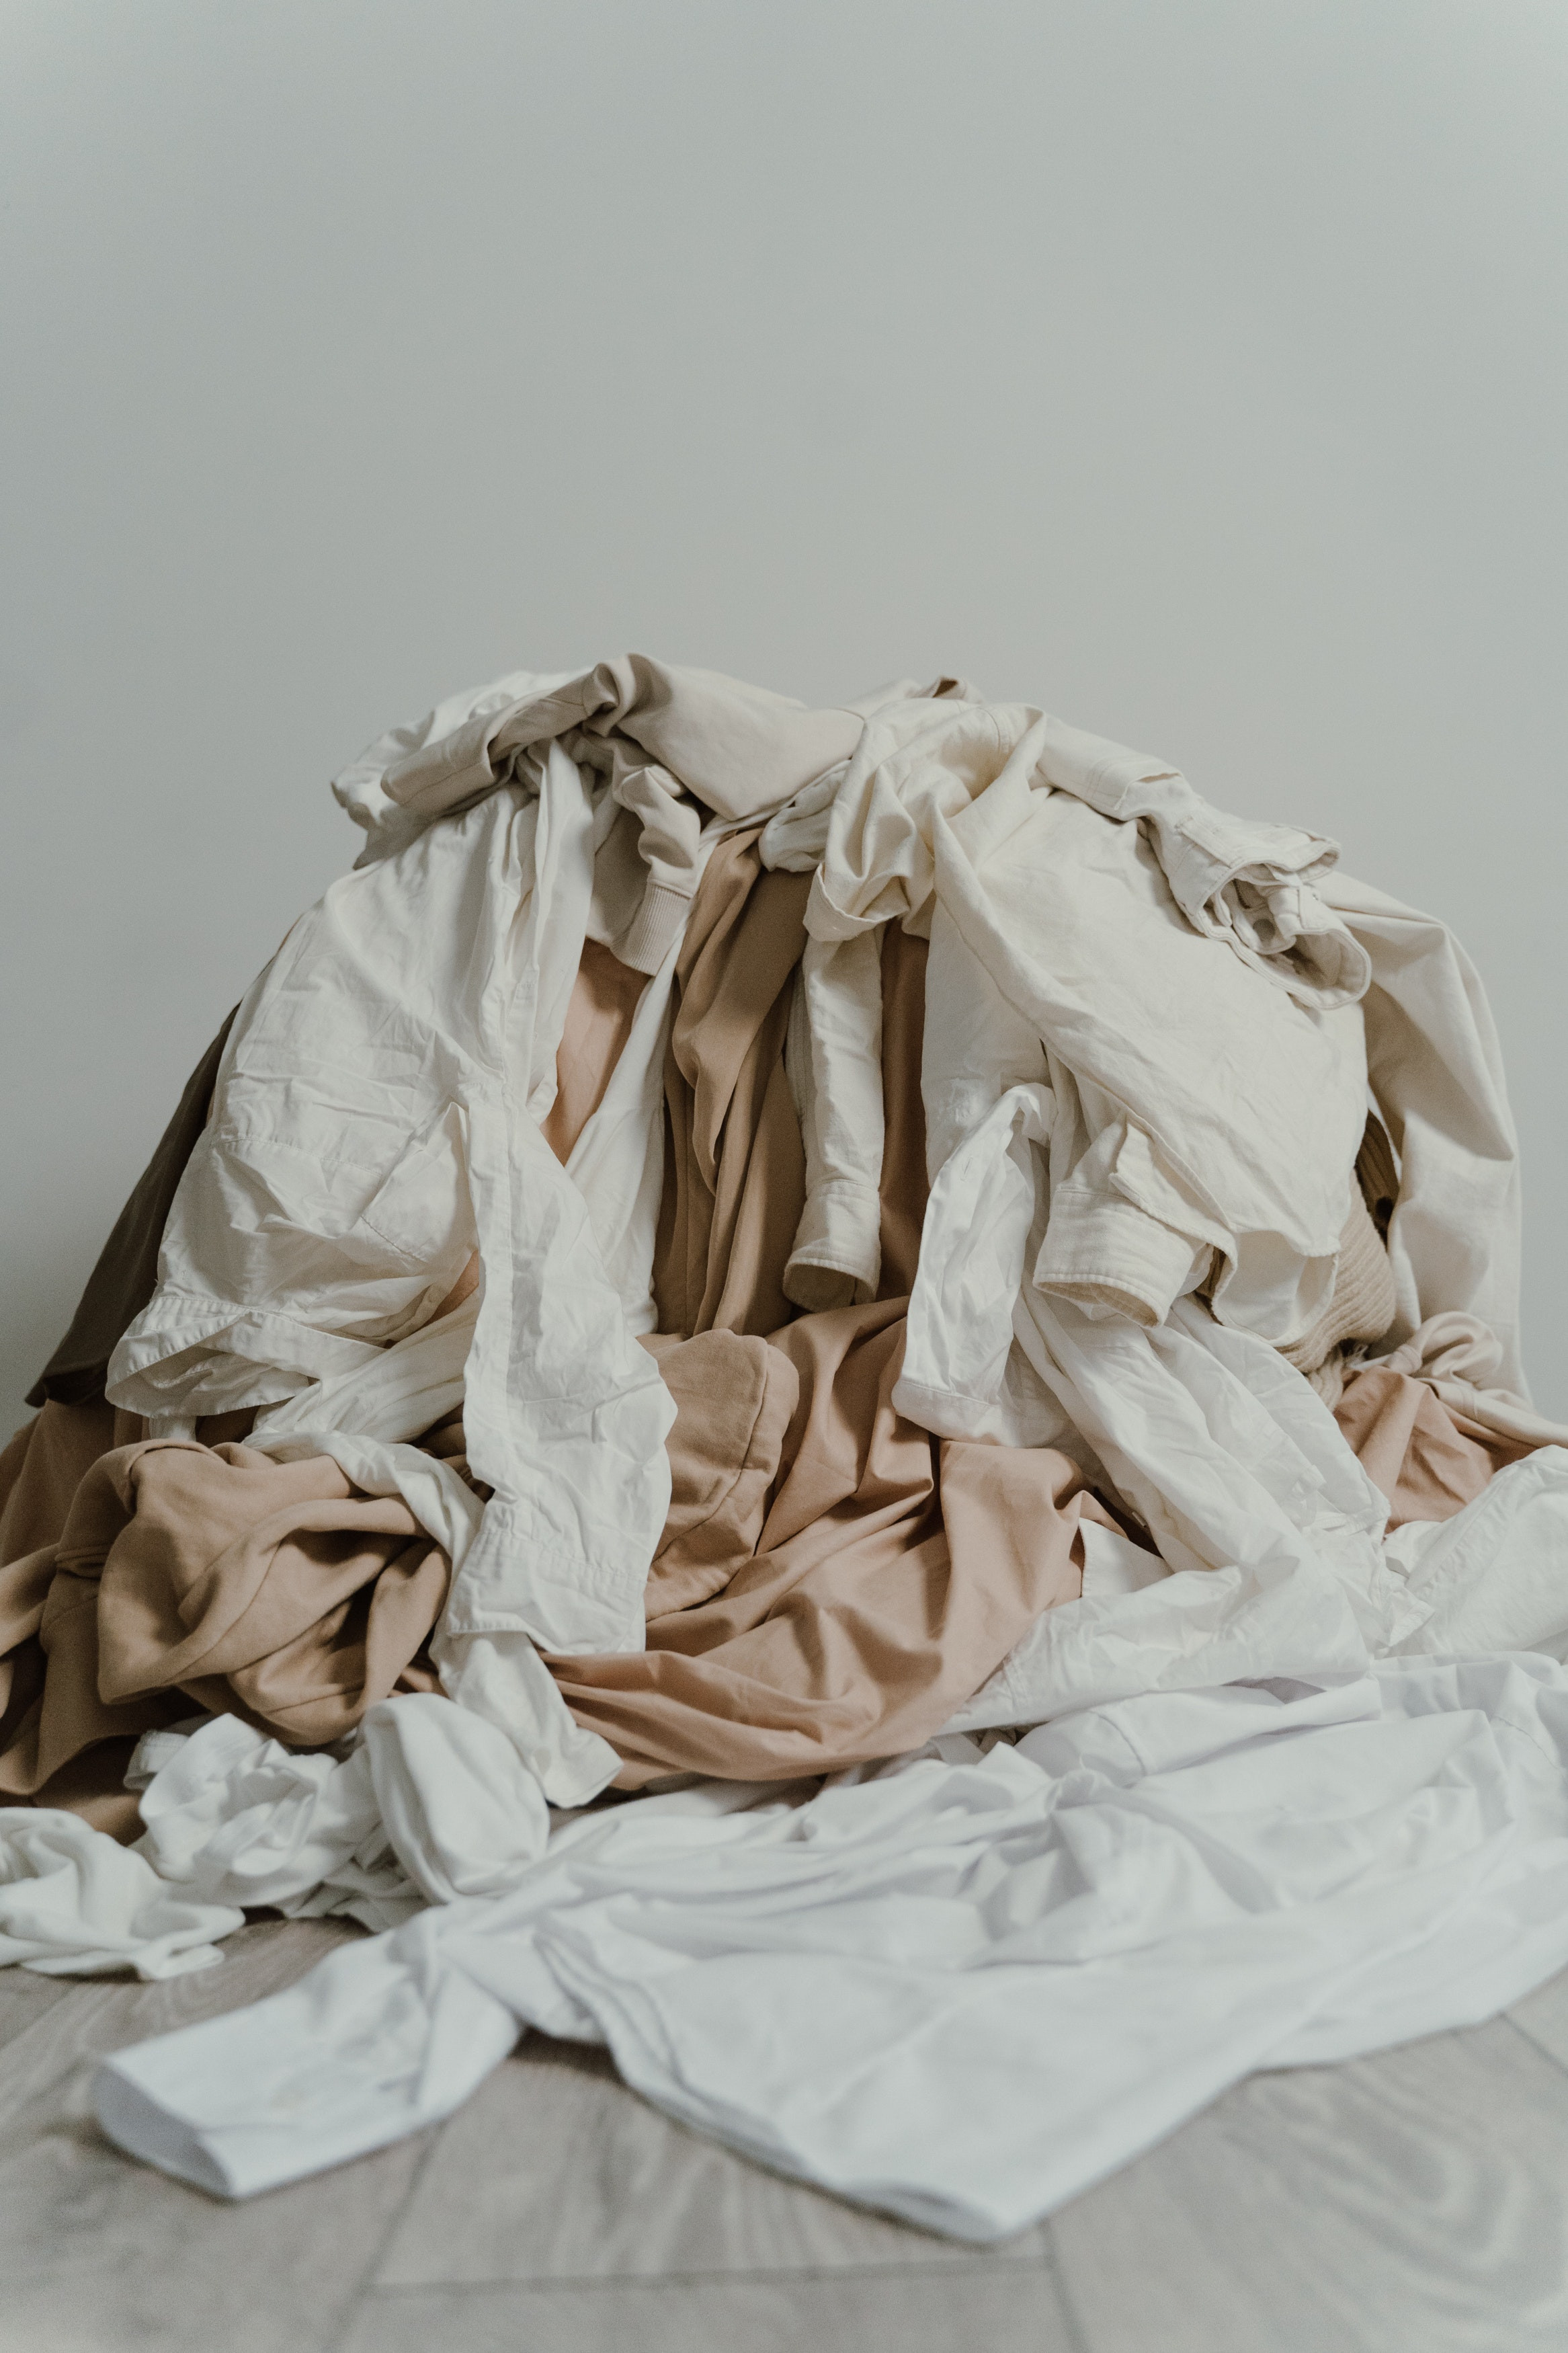 Discover the fascinating journey of textiles from creation to disposal. Know the sustainable practices of recycling, reusing and recycling, and the environmental impact of clothing that ends up in landfills